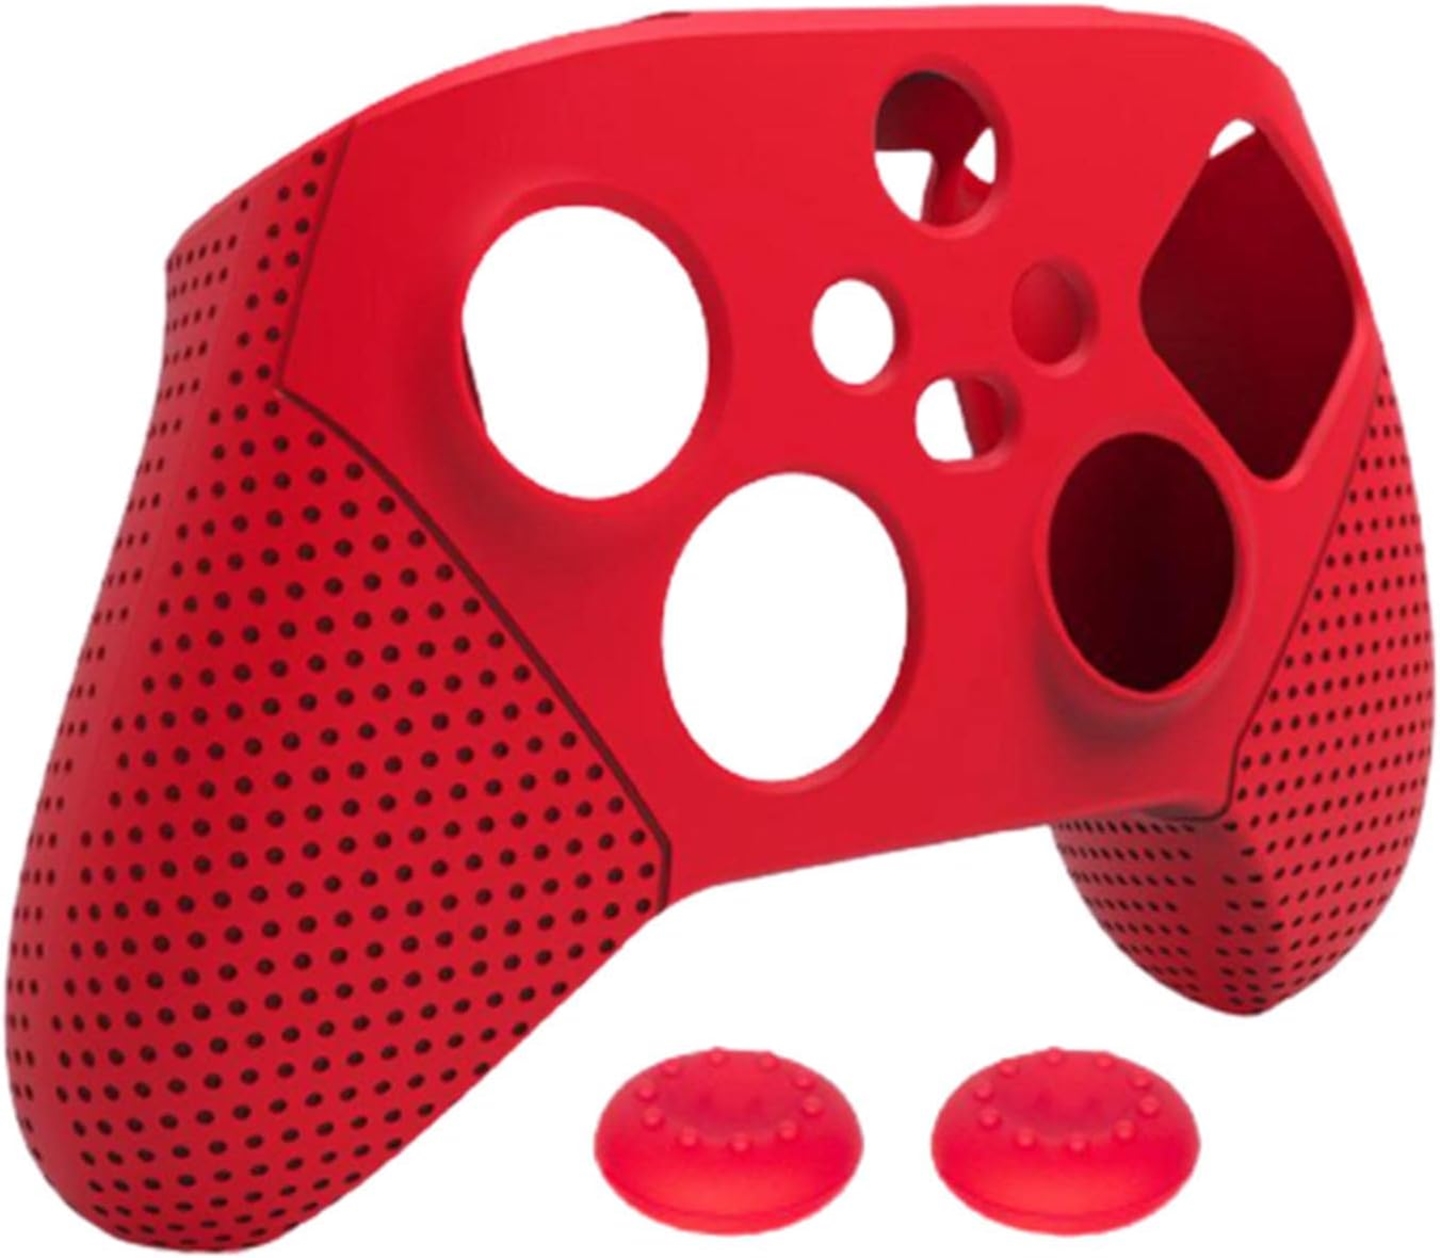 Red silicone case for Xbox Series X|S controller.